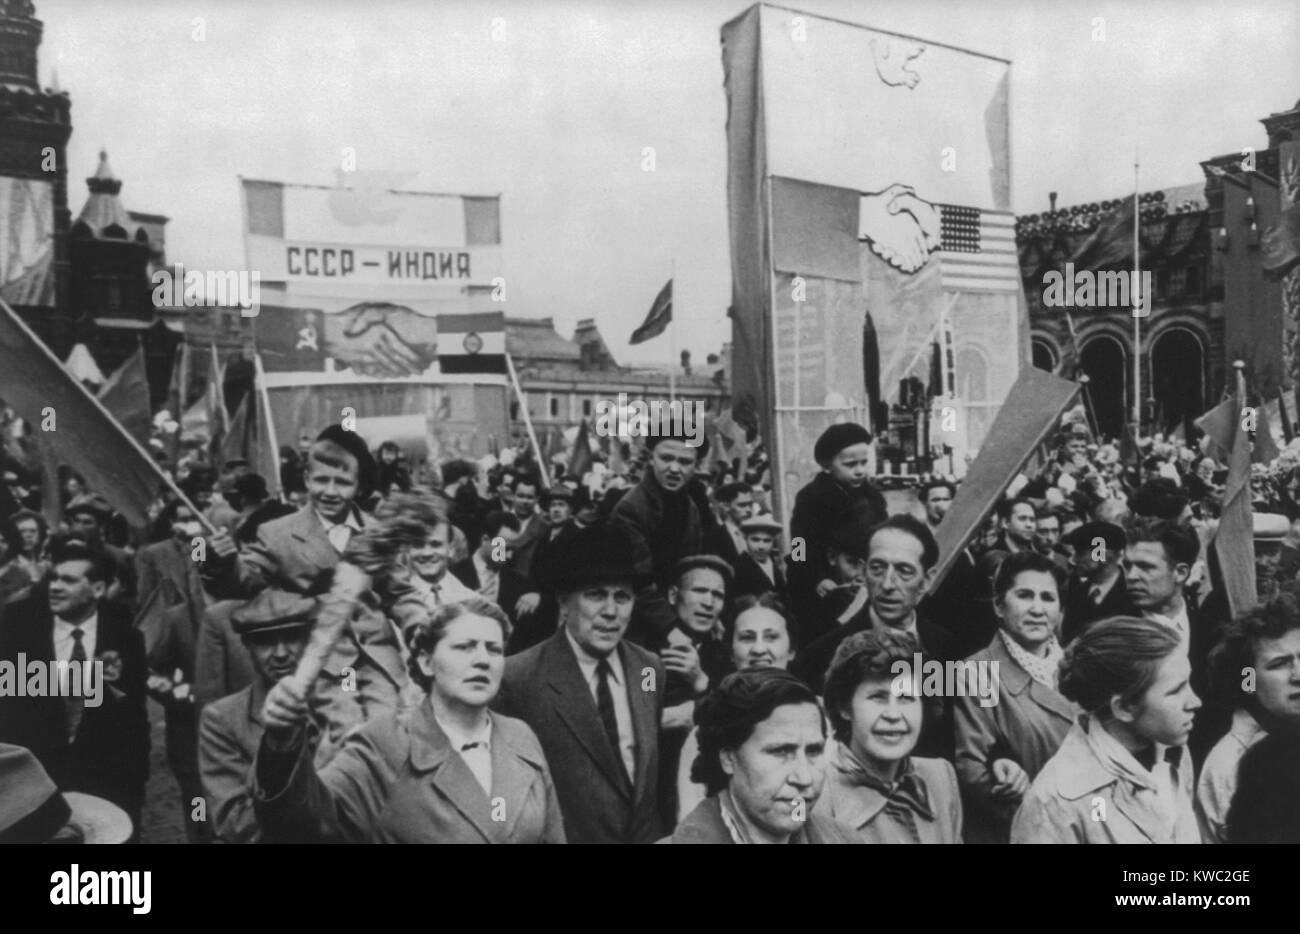 May Day celebration is Moscow, 1960. Communist demonstration of representatives of the working people on the Red Square. (BSLOC 2015 2 260) Stock Photo